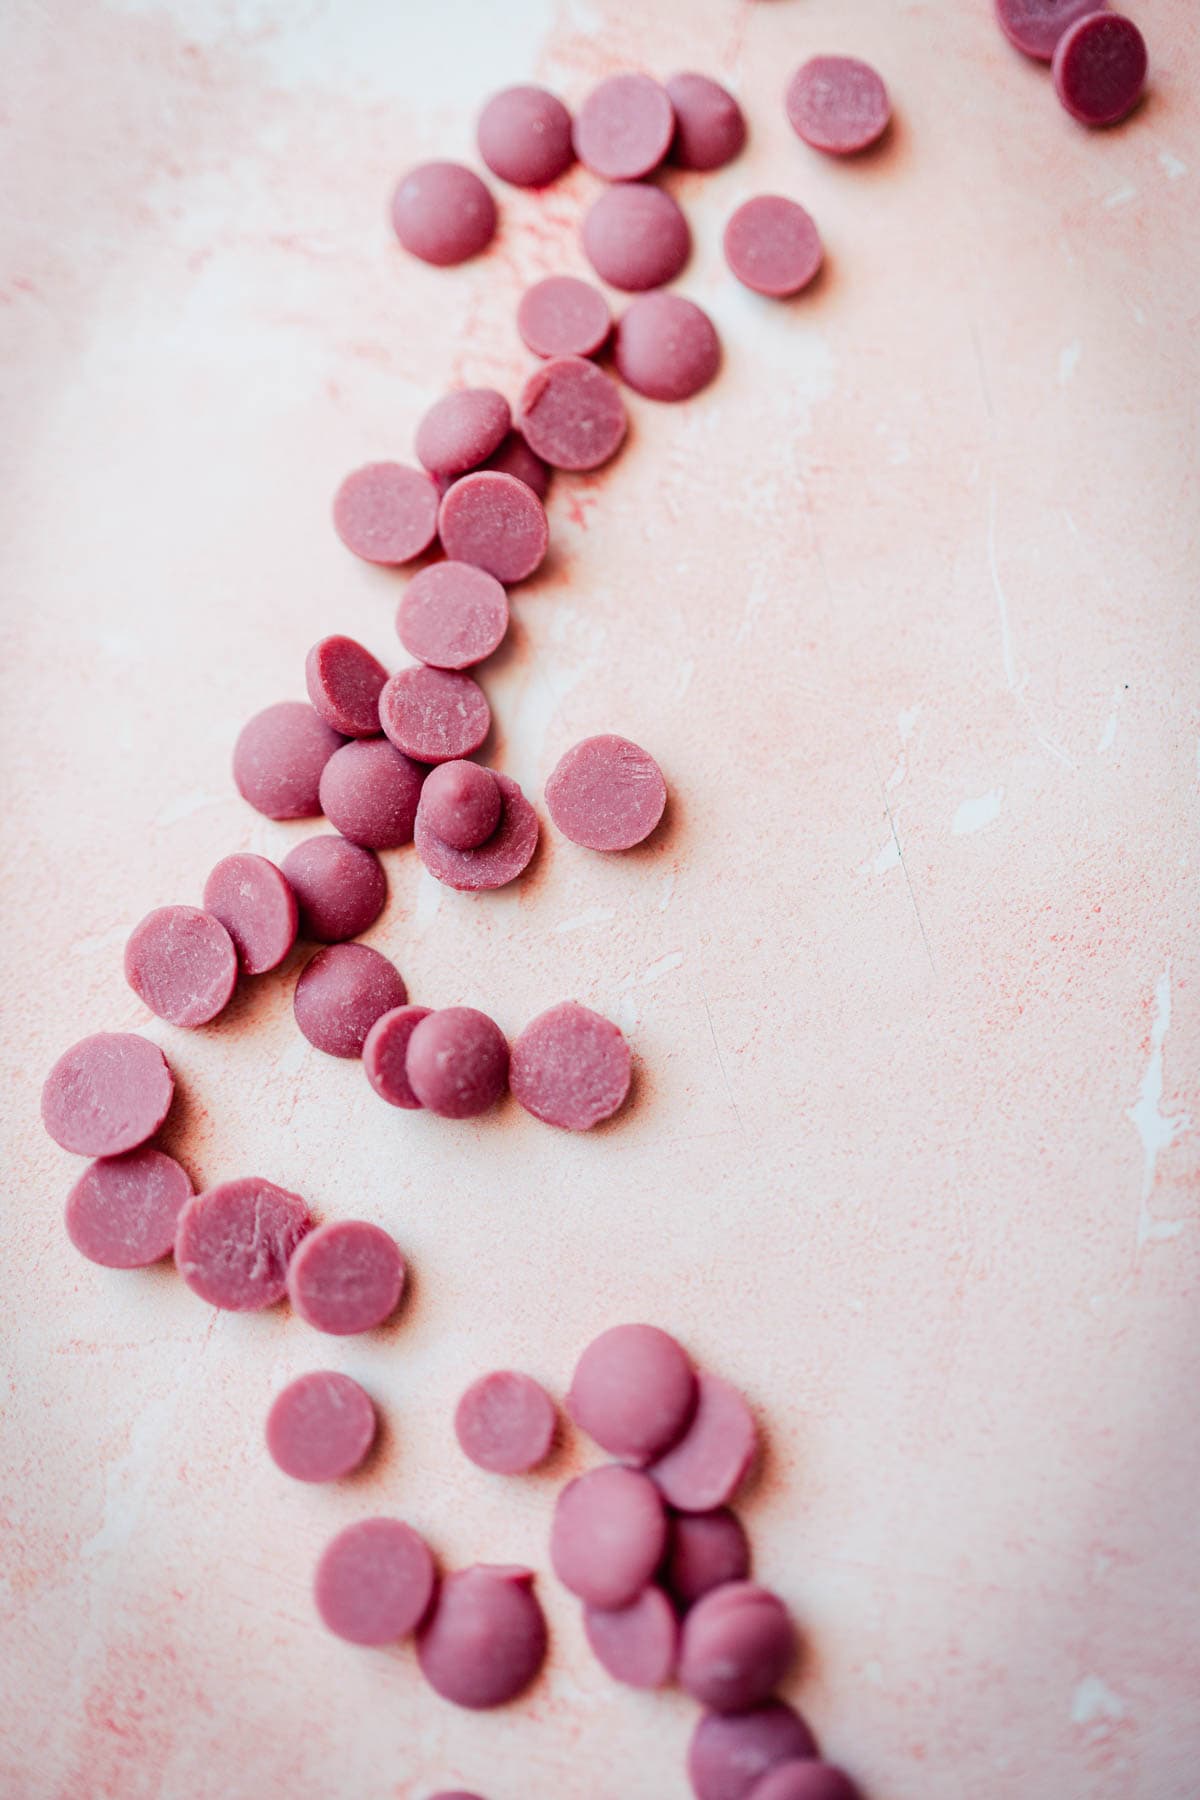 Ruby chocolate chips scattered on a pink table.